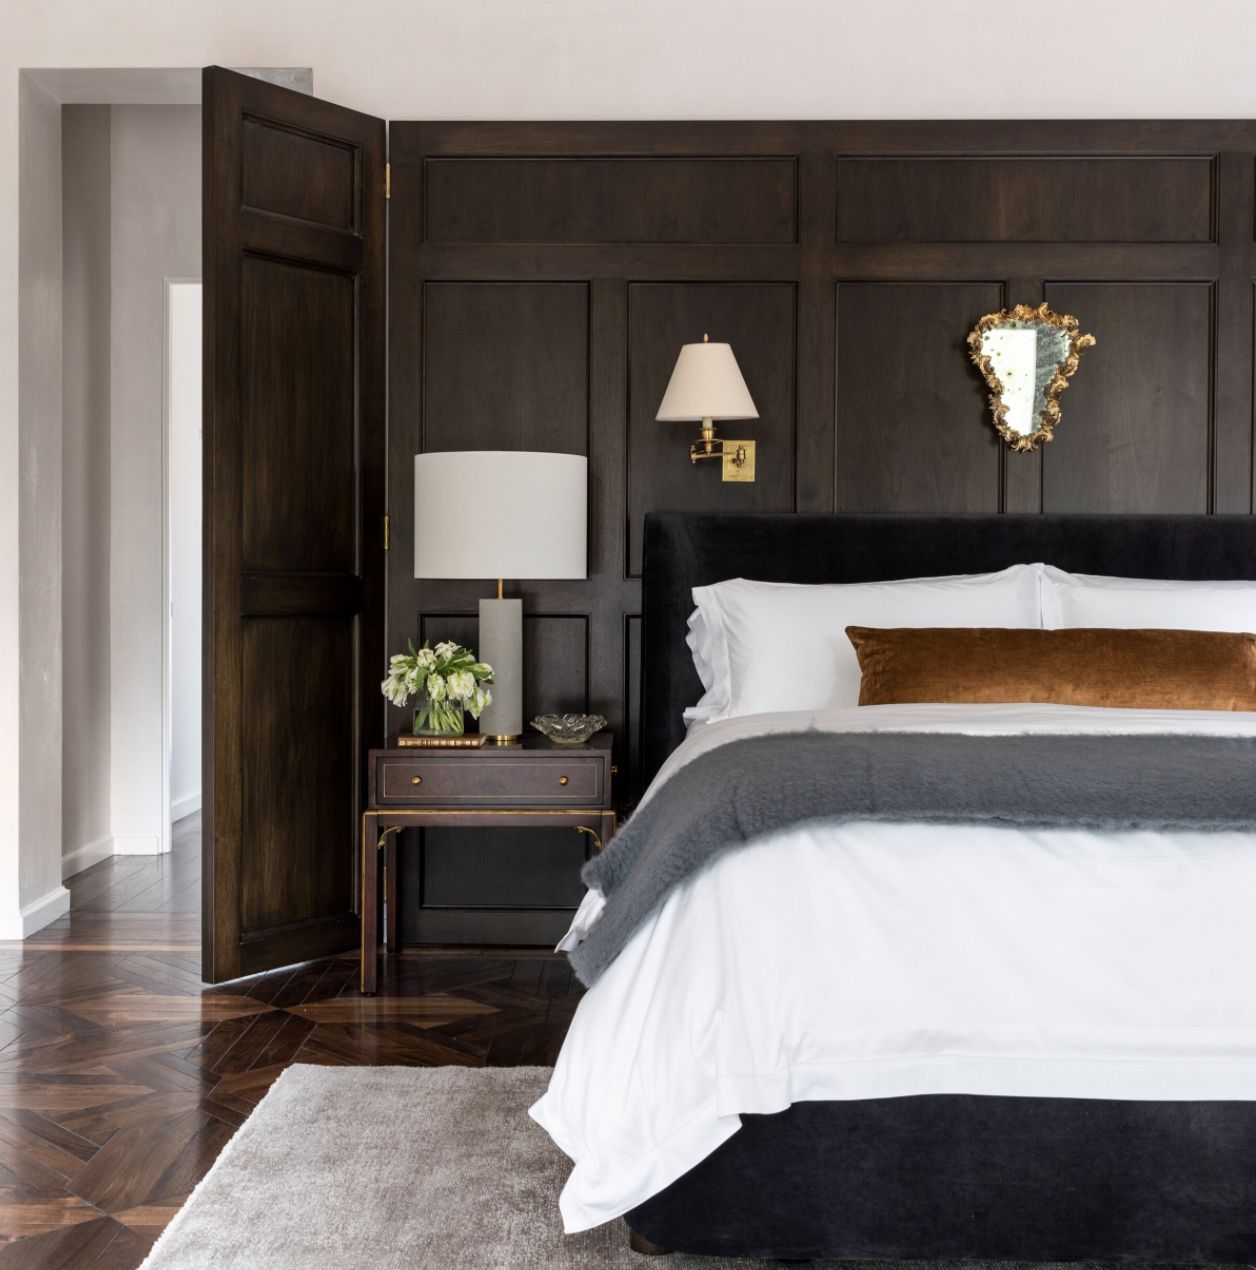 neutral bedroom with wood panel walls, neutral bedding, and wooden floors